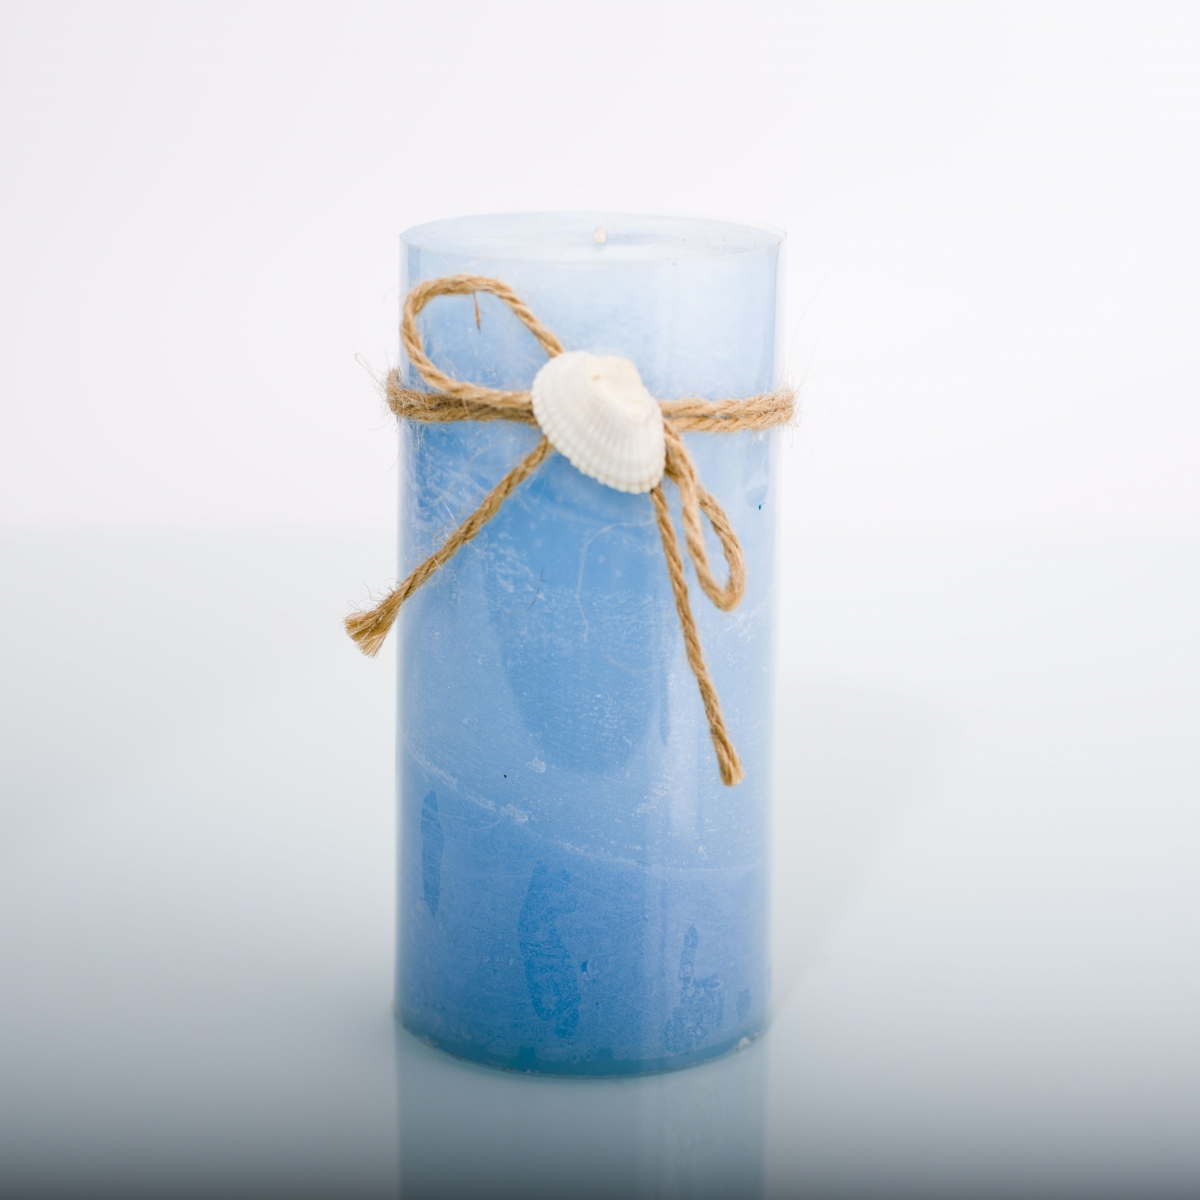 Pillar Candles：Palm Beach ,Blue Color ,Grey Marble ,Hemp Rope ,Shell ,China Factory ,Cheapest Price-HOWCANDLE-Candles,Scented Candles,Aromatherapy Candles,Soy Candles,Vegan Candles,Jar Candles,Pillar Candles,Candle Gift Sets,Essential Oils,Reed Diffuser,Candle Holder,